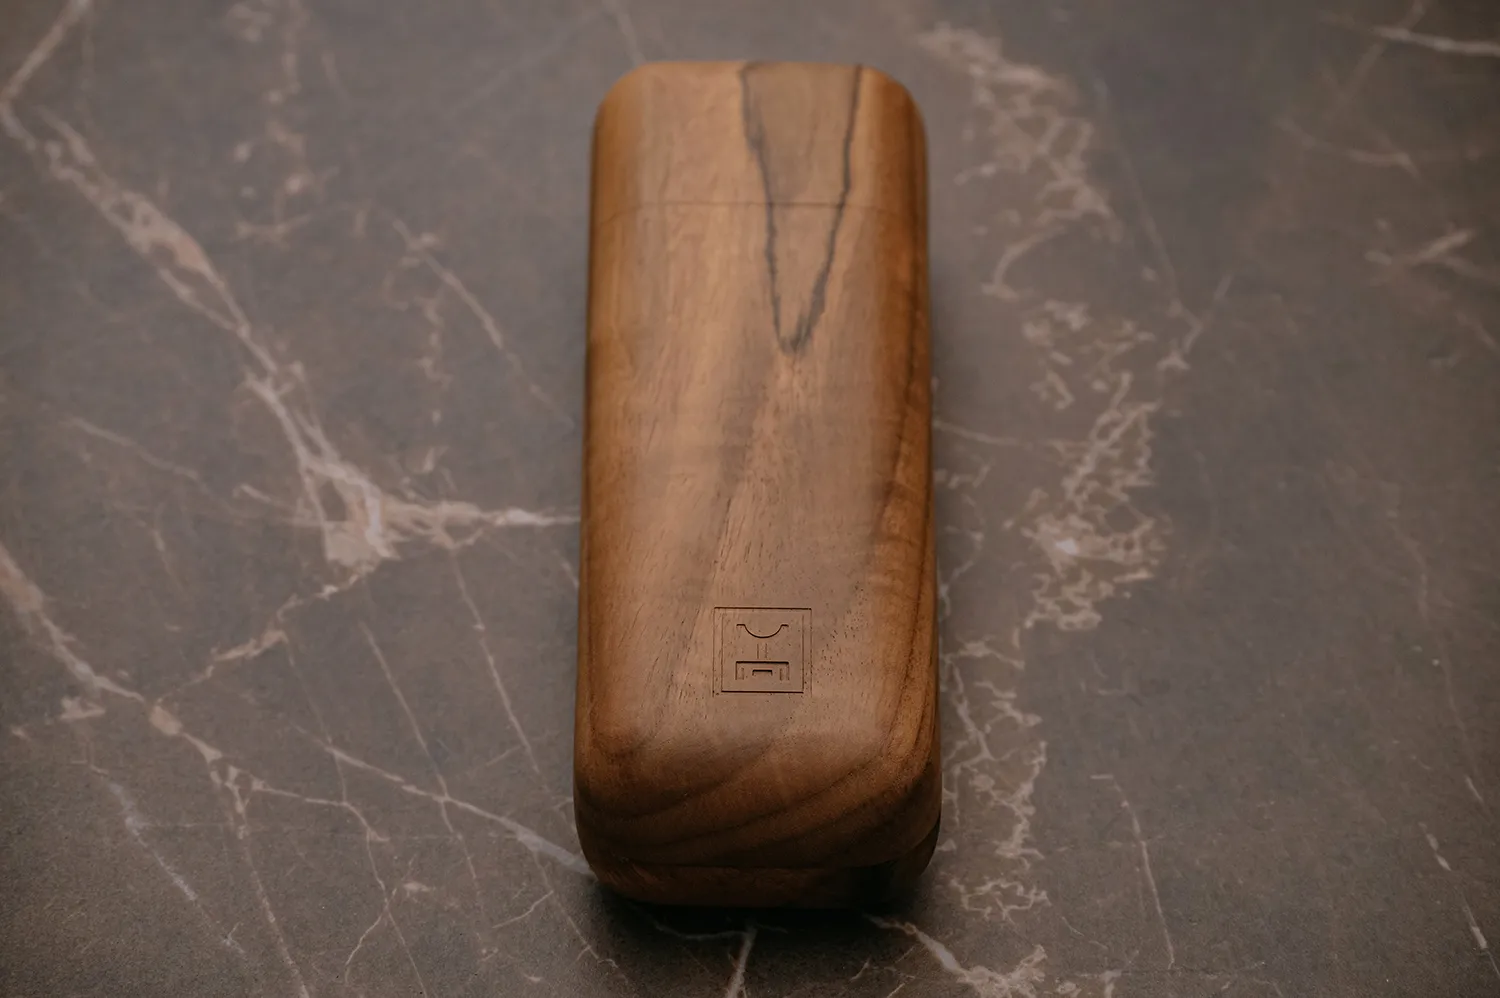 The Walnut cigar case is luxurious gift. It holds two cigars in good humidity and is finished in a food-safe oil